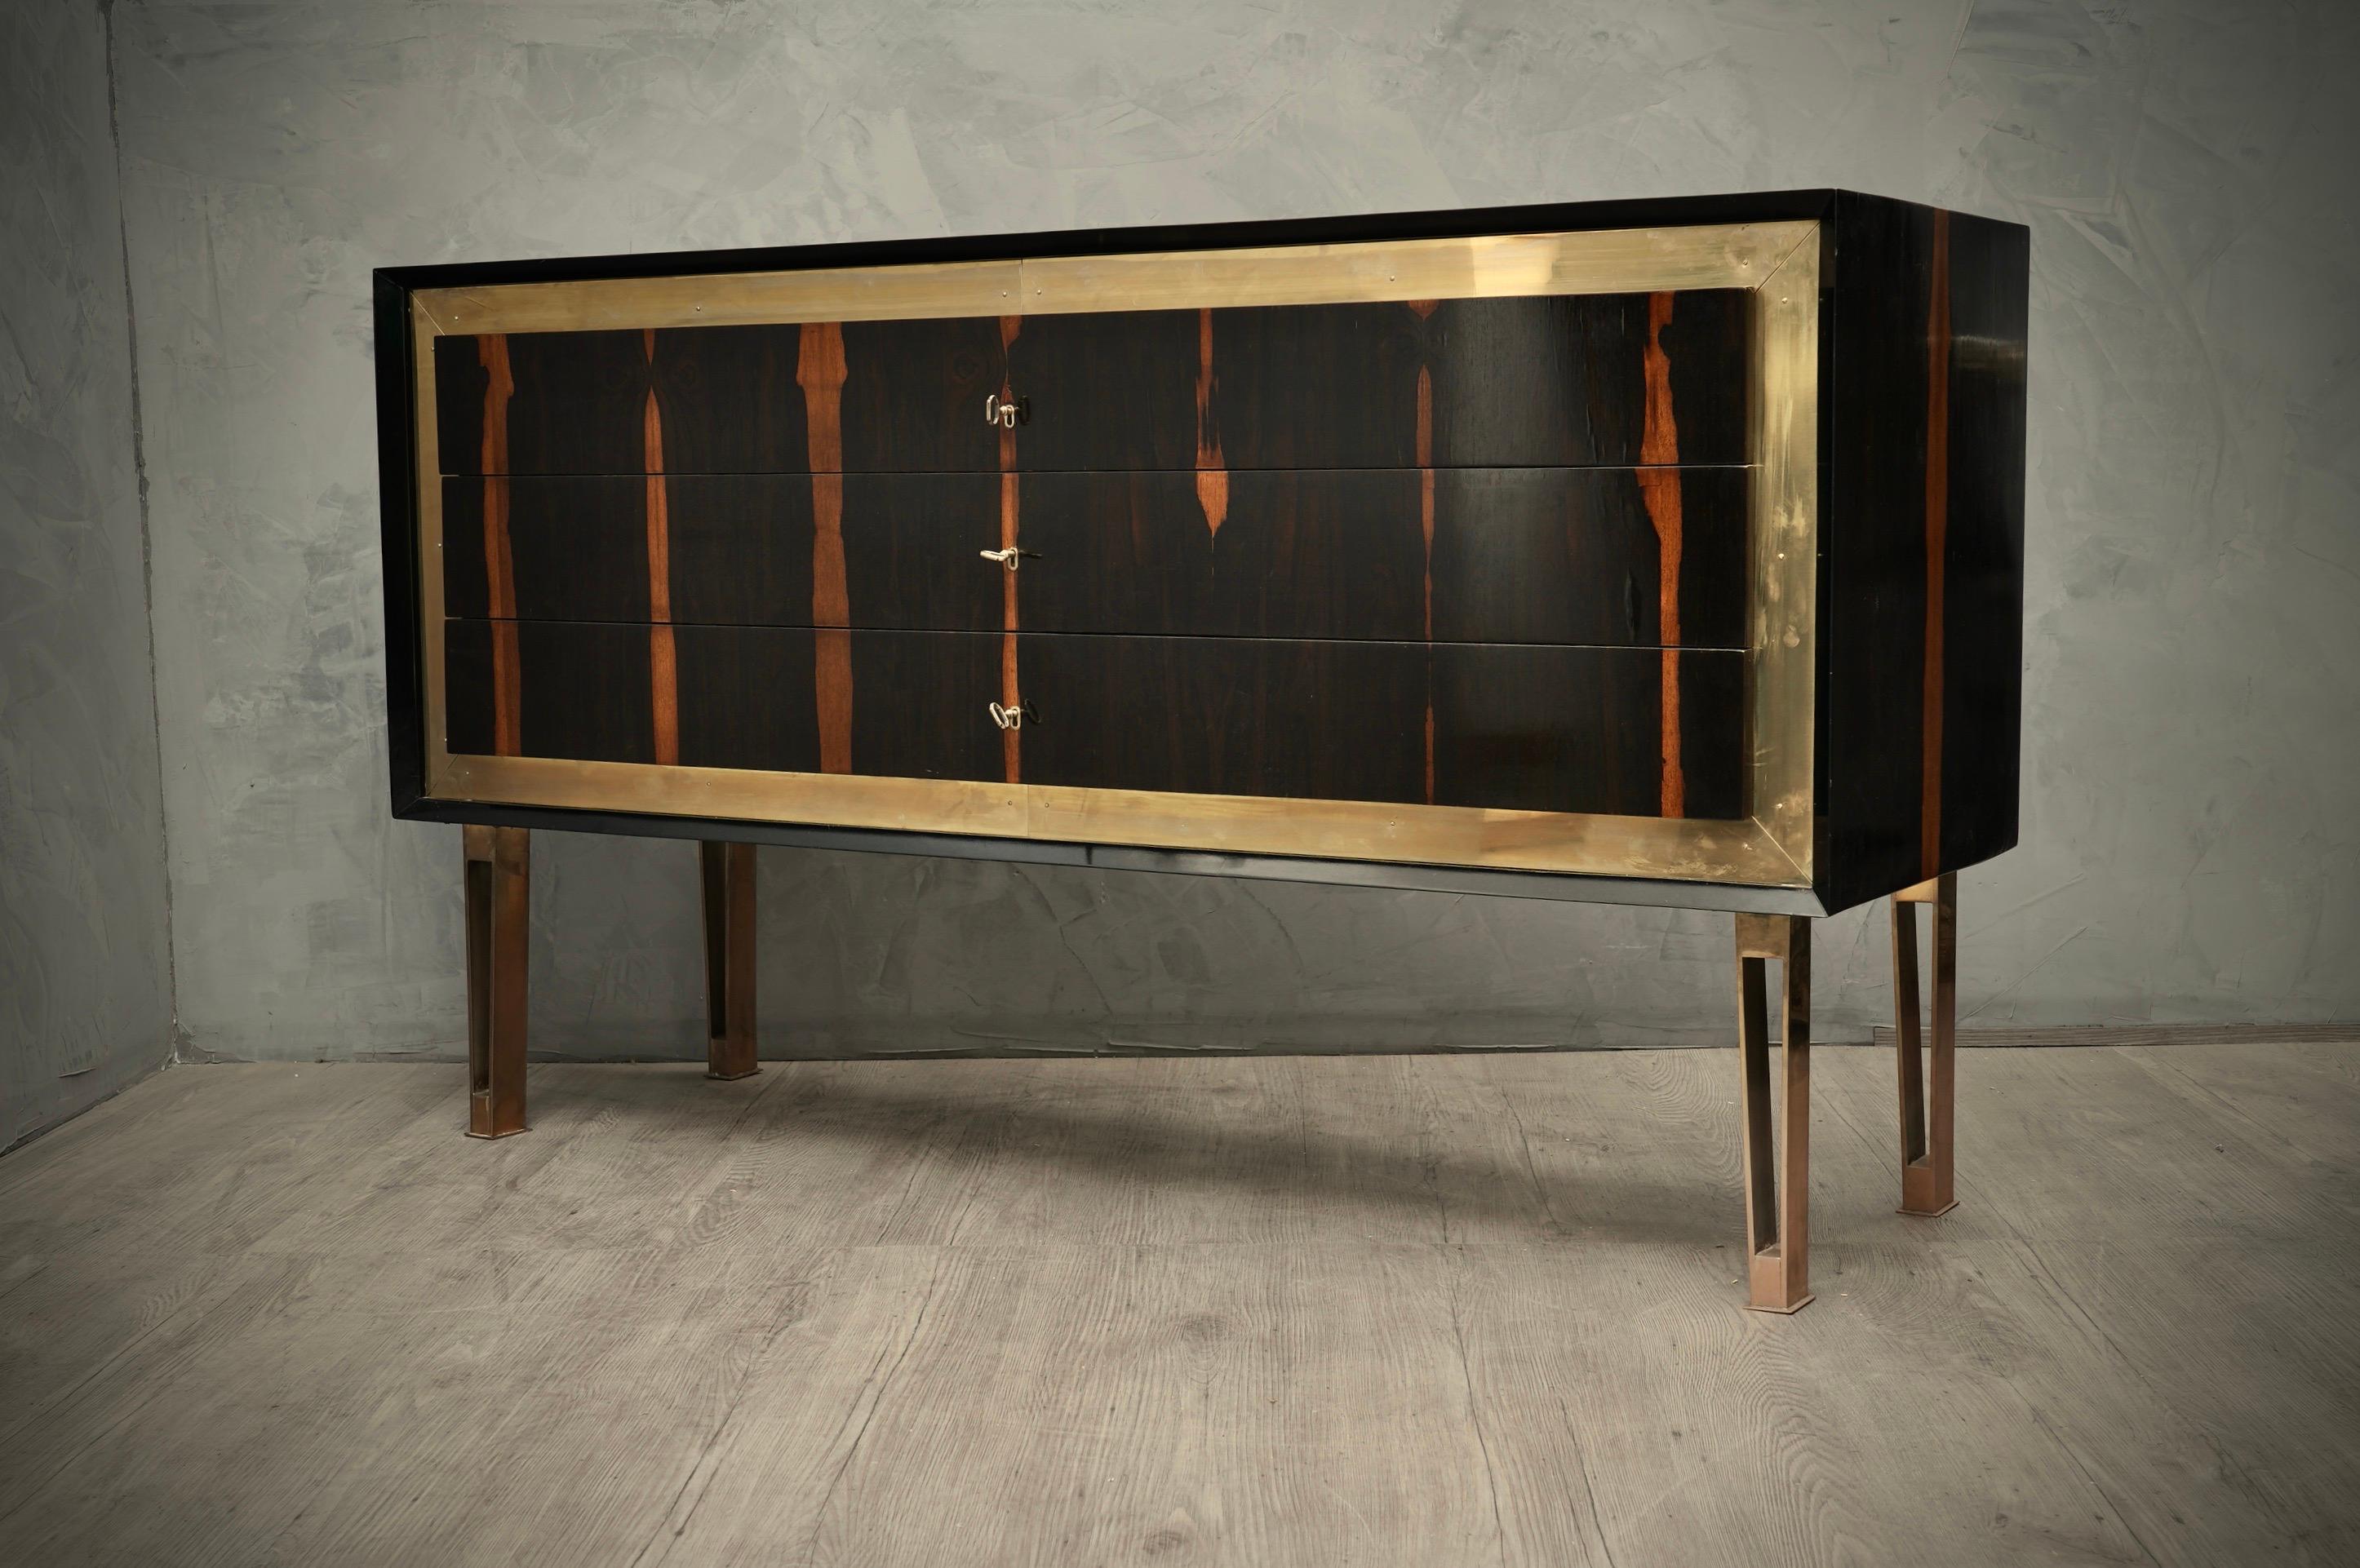 Linear, square but very elegant, the commode has a very particular design also due to the fact that it is made with quality materials, walnut wood and polished brass.

Body entirely veneered in walnut wood with a beautiful grain, and a beautiful